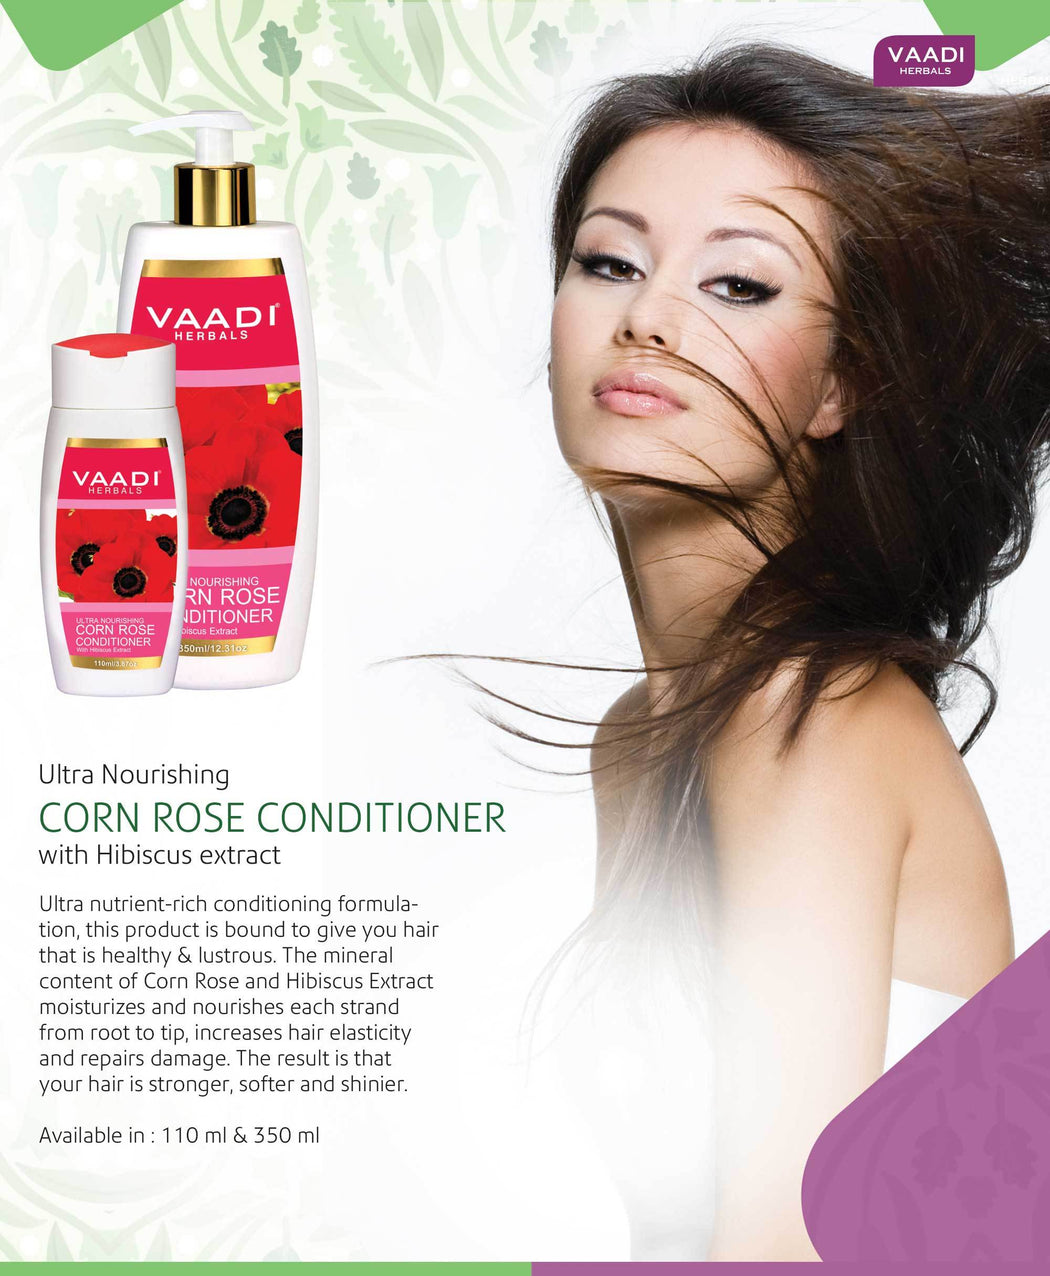 Ultra Nutrient Organic Rich Corn Rose Conditioner with Hibiscus Extract- Conditions & Softens Hair ( 350ml / 12 fl oz)